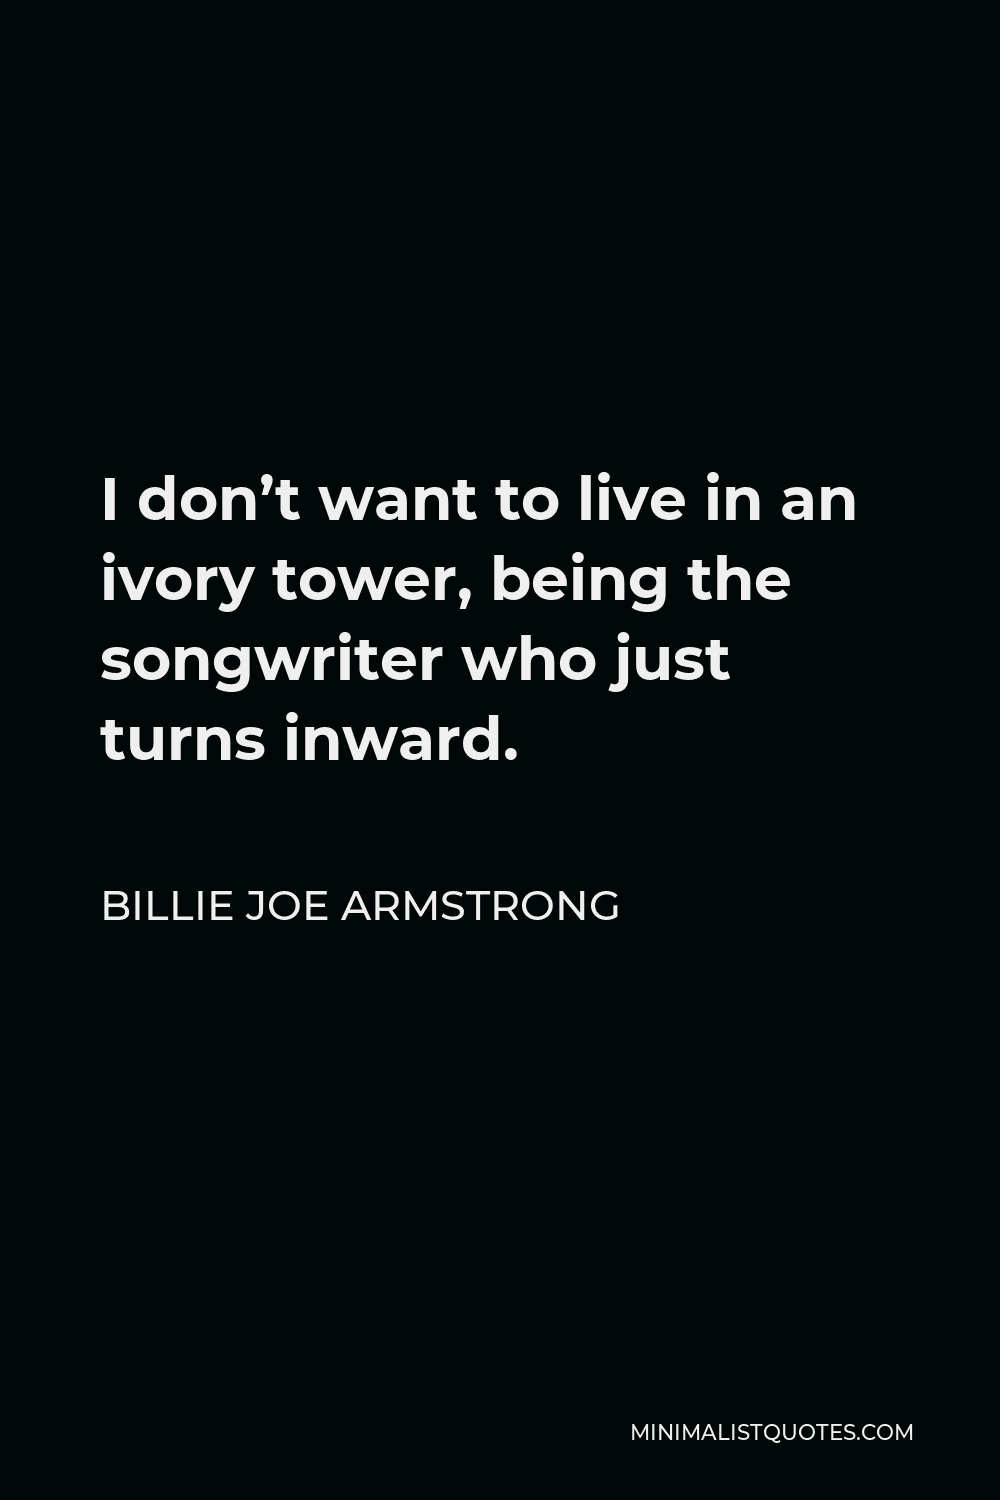 Billie Joe Armstrong Quote - I don’t want to live in an ivory tower, being the songwriter who just turns inward.